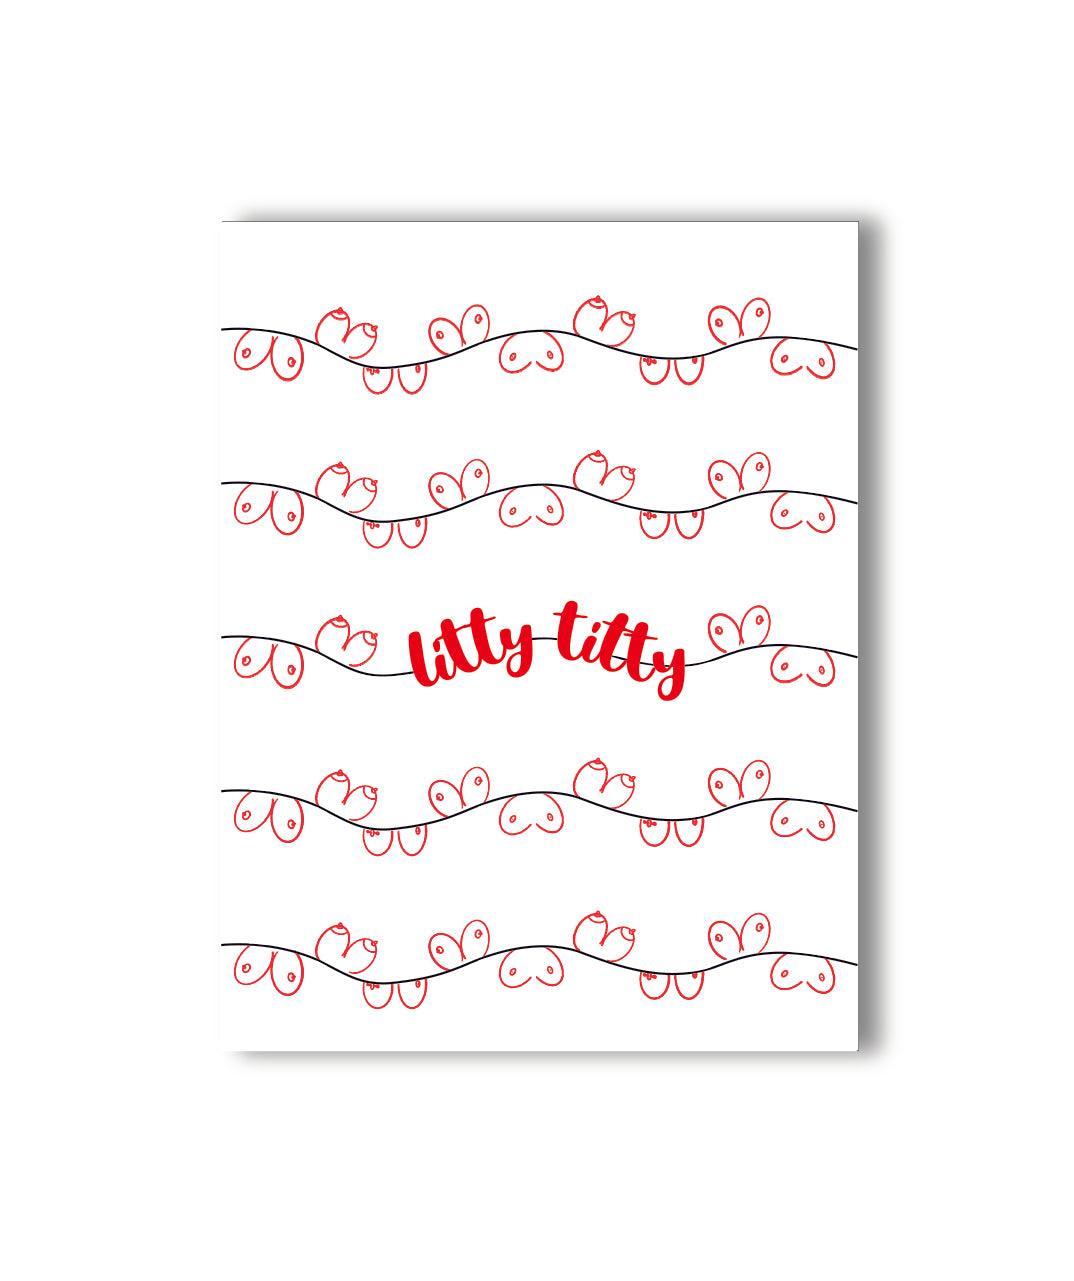 Fun and cheeky Christmas card featuring a pattern of boobs adorned with Christmas lights and &